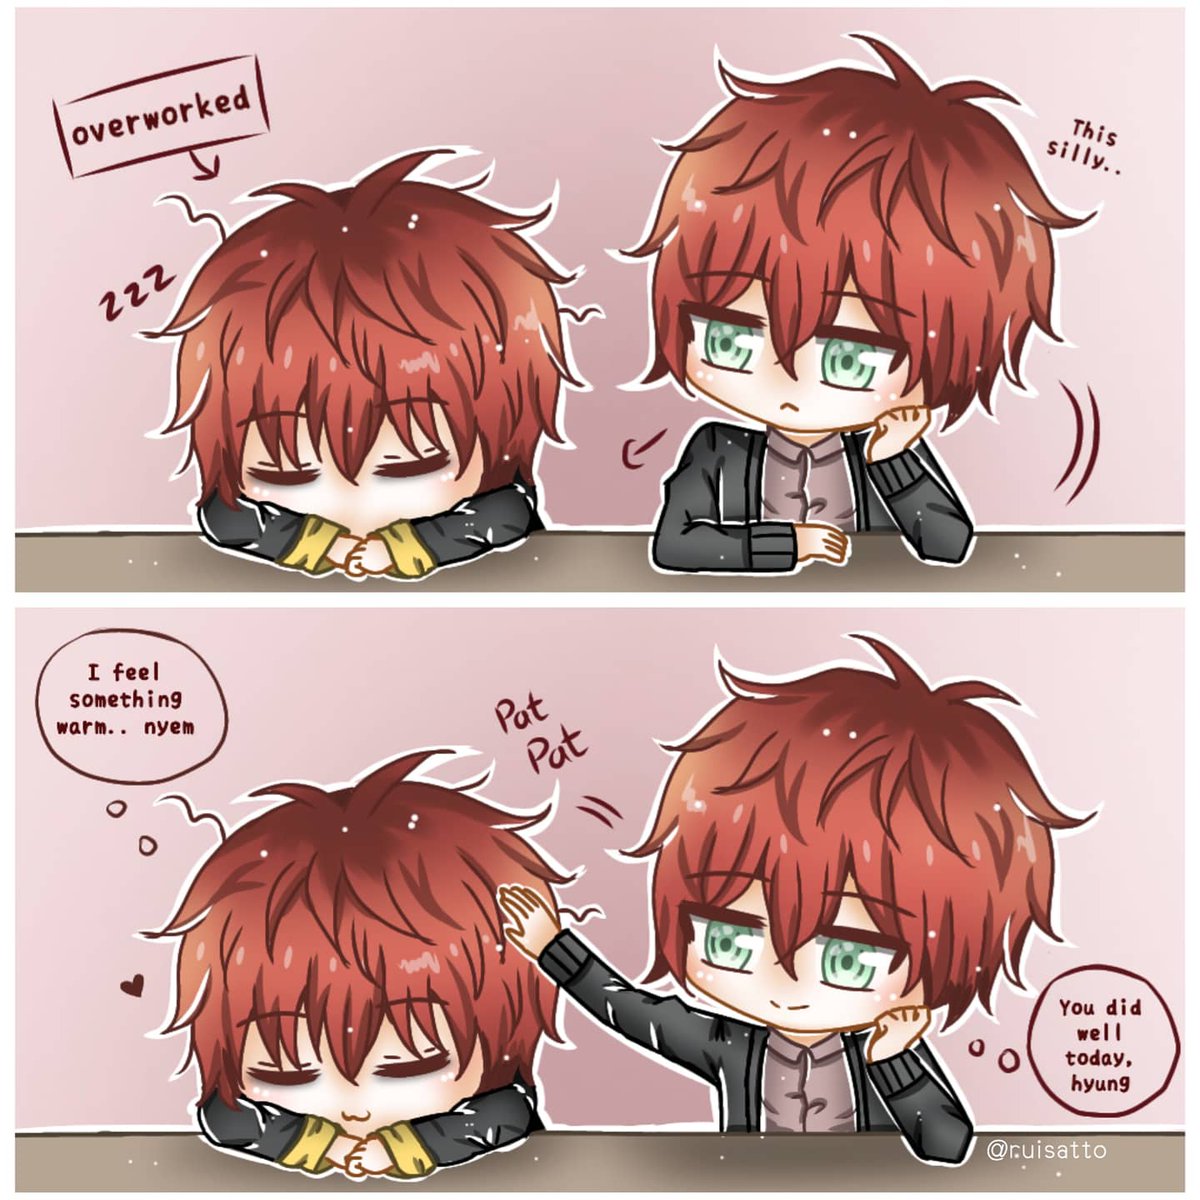 'Ah, he'll catch a cold. I'll get blanket for him,'
#mysticmessenger #choitwins #mysme707 #mysmesaeran #mysmeunknown #mysmesaeyoung #saeyoungchoi #lucielchoi #saeranchoi #raychoi #unknown #ray #otomegame #koreangame #artwork #comic #art_4share #artistontwitter